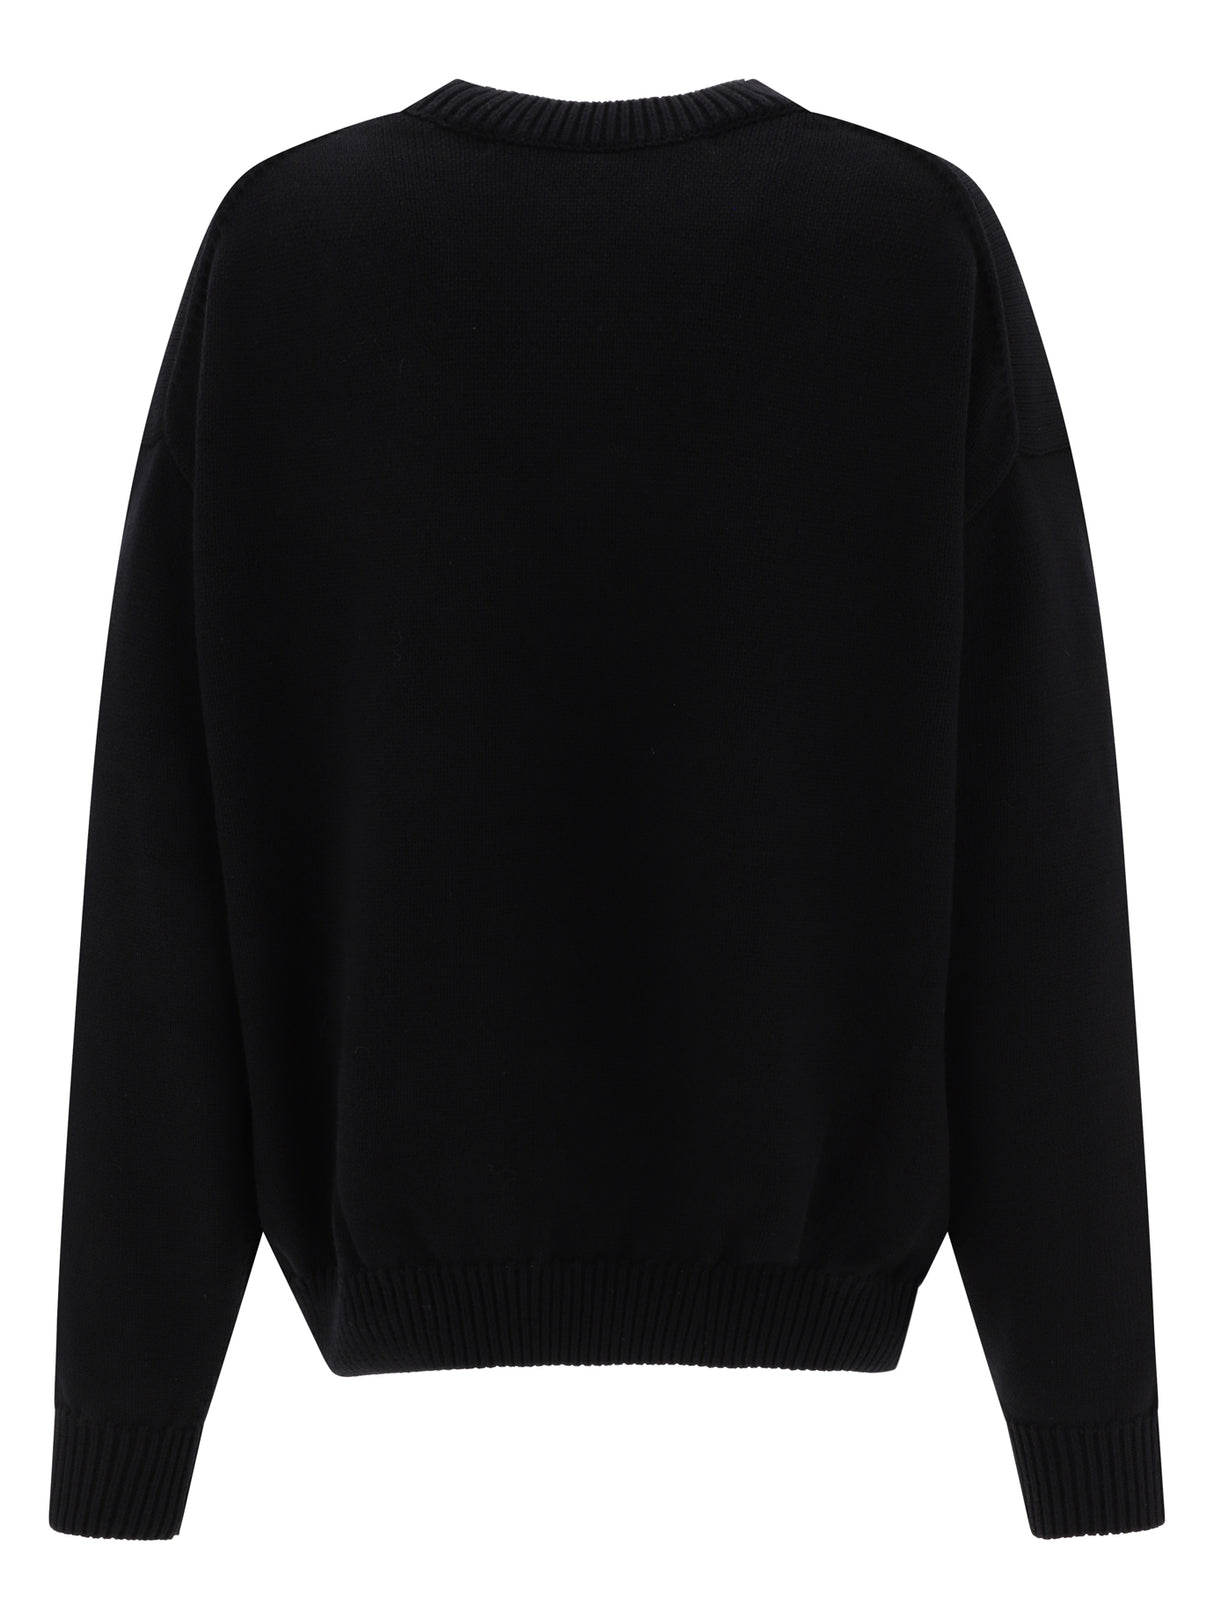 ALEXANDER WANG Classic Black Oversized Sweater for Women - FW23 Collection